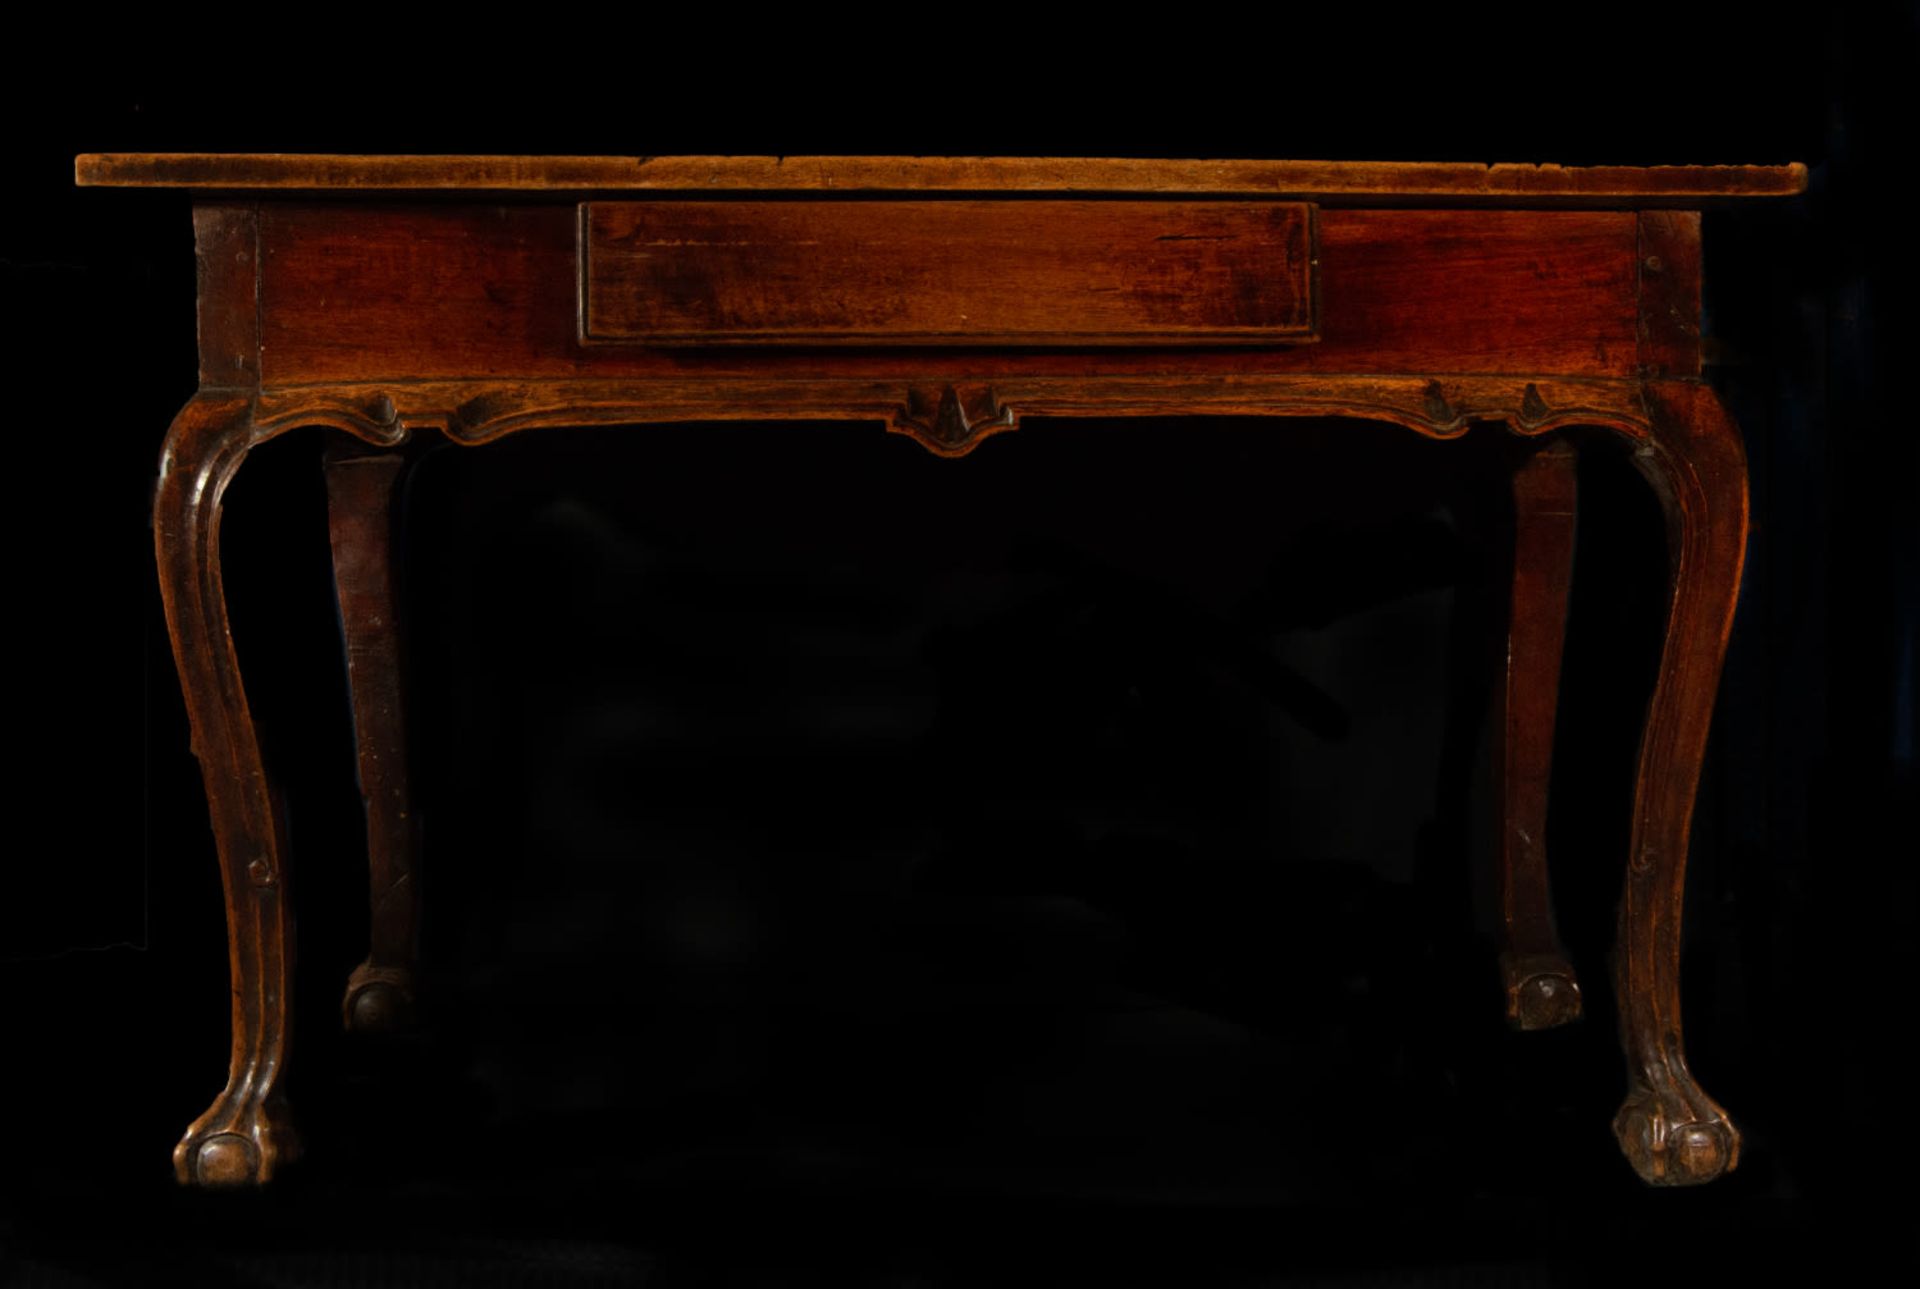 Dutch colonial desk in mahogany wood, Netherlands Antilles, 18th century